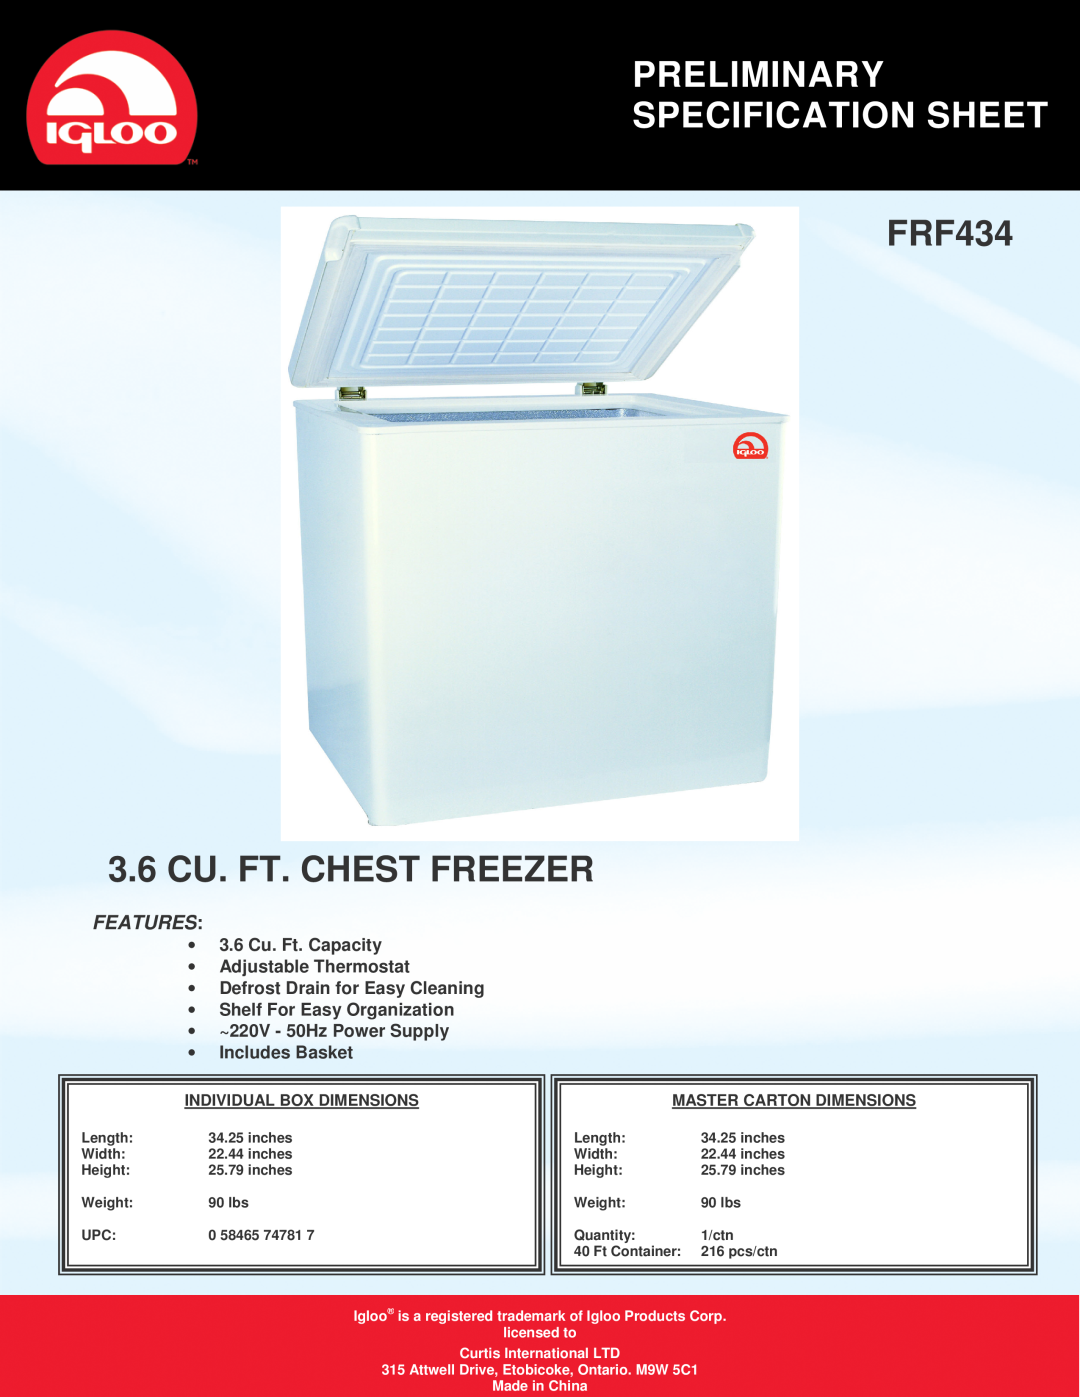 Igloo specifications Preliminary Specification Sheet, FRF434 3.6 CU. FT. CHEST FREEZER, Features, Made in China 